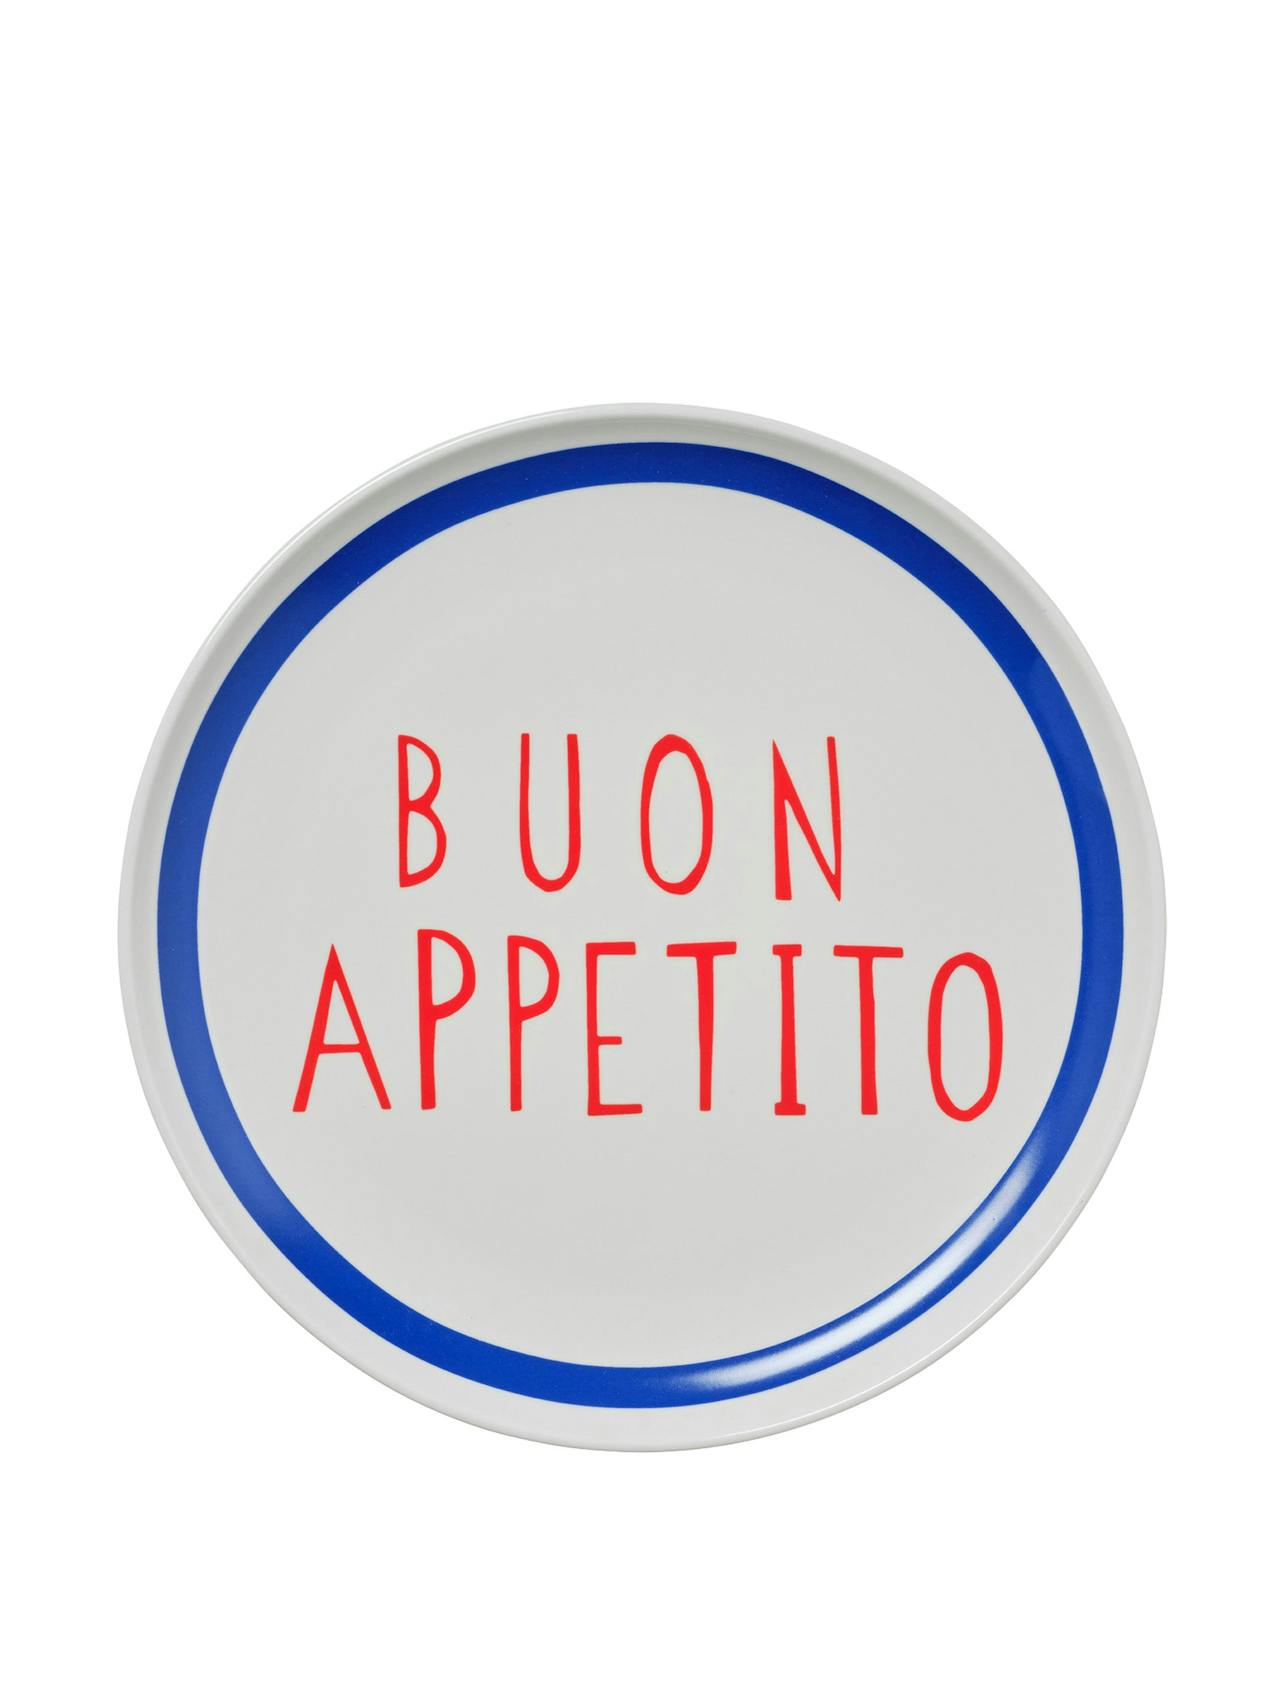 Large Buon Appetito plate